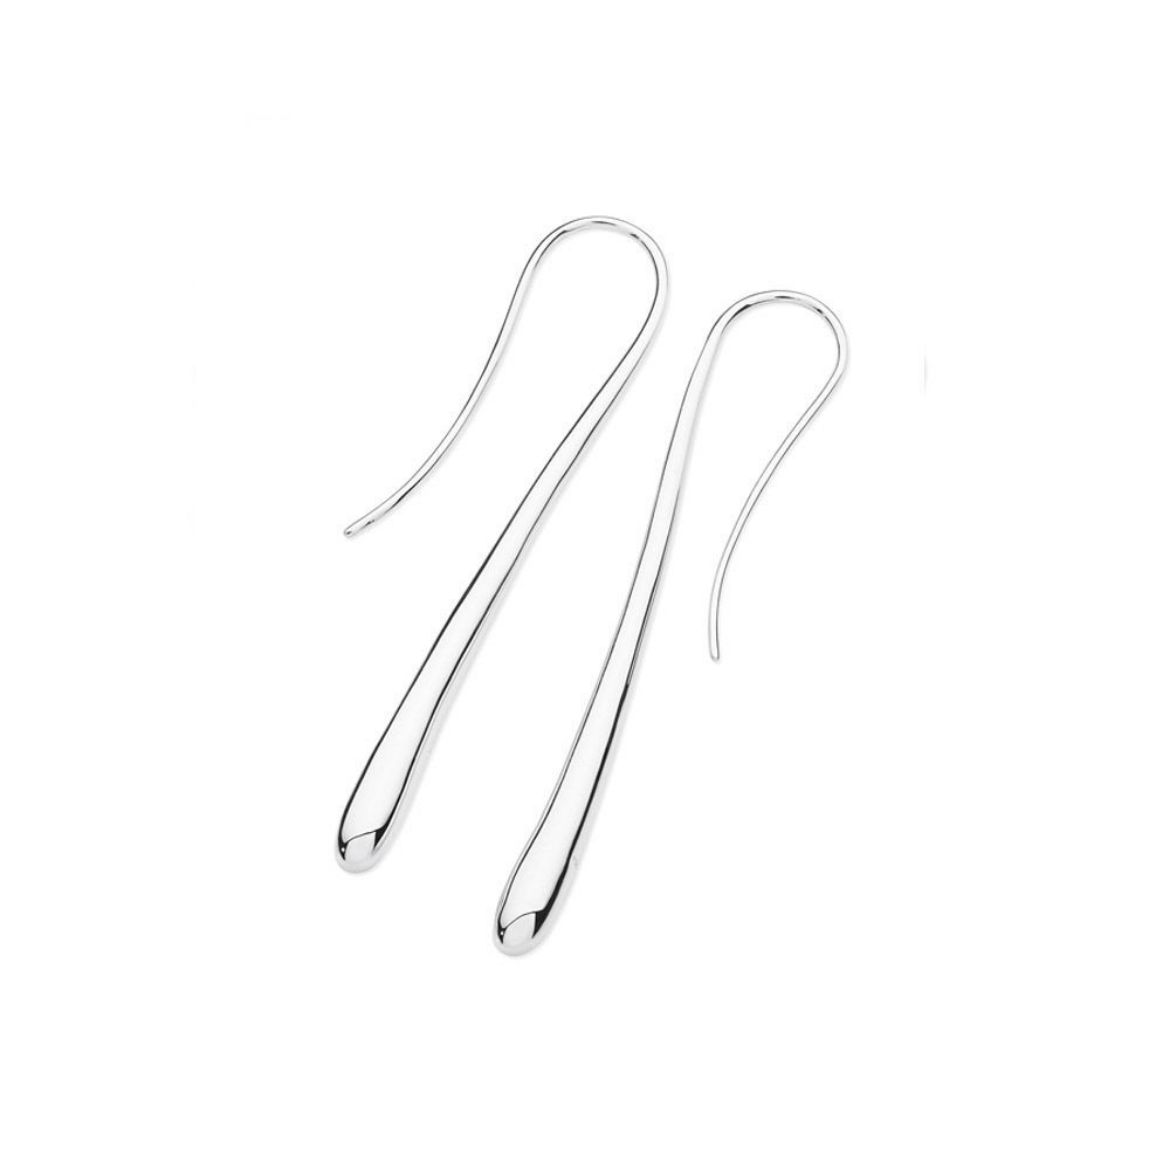 Picture of Long Solid Drop Earrings